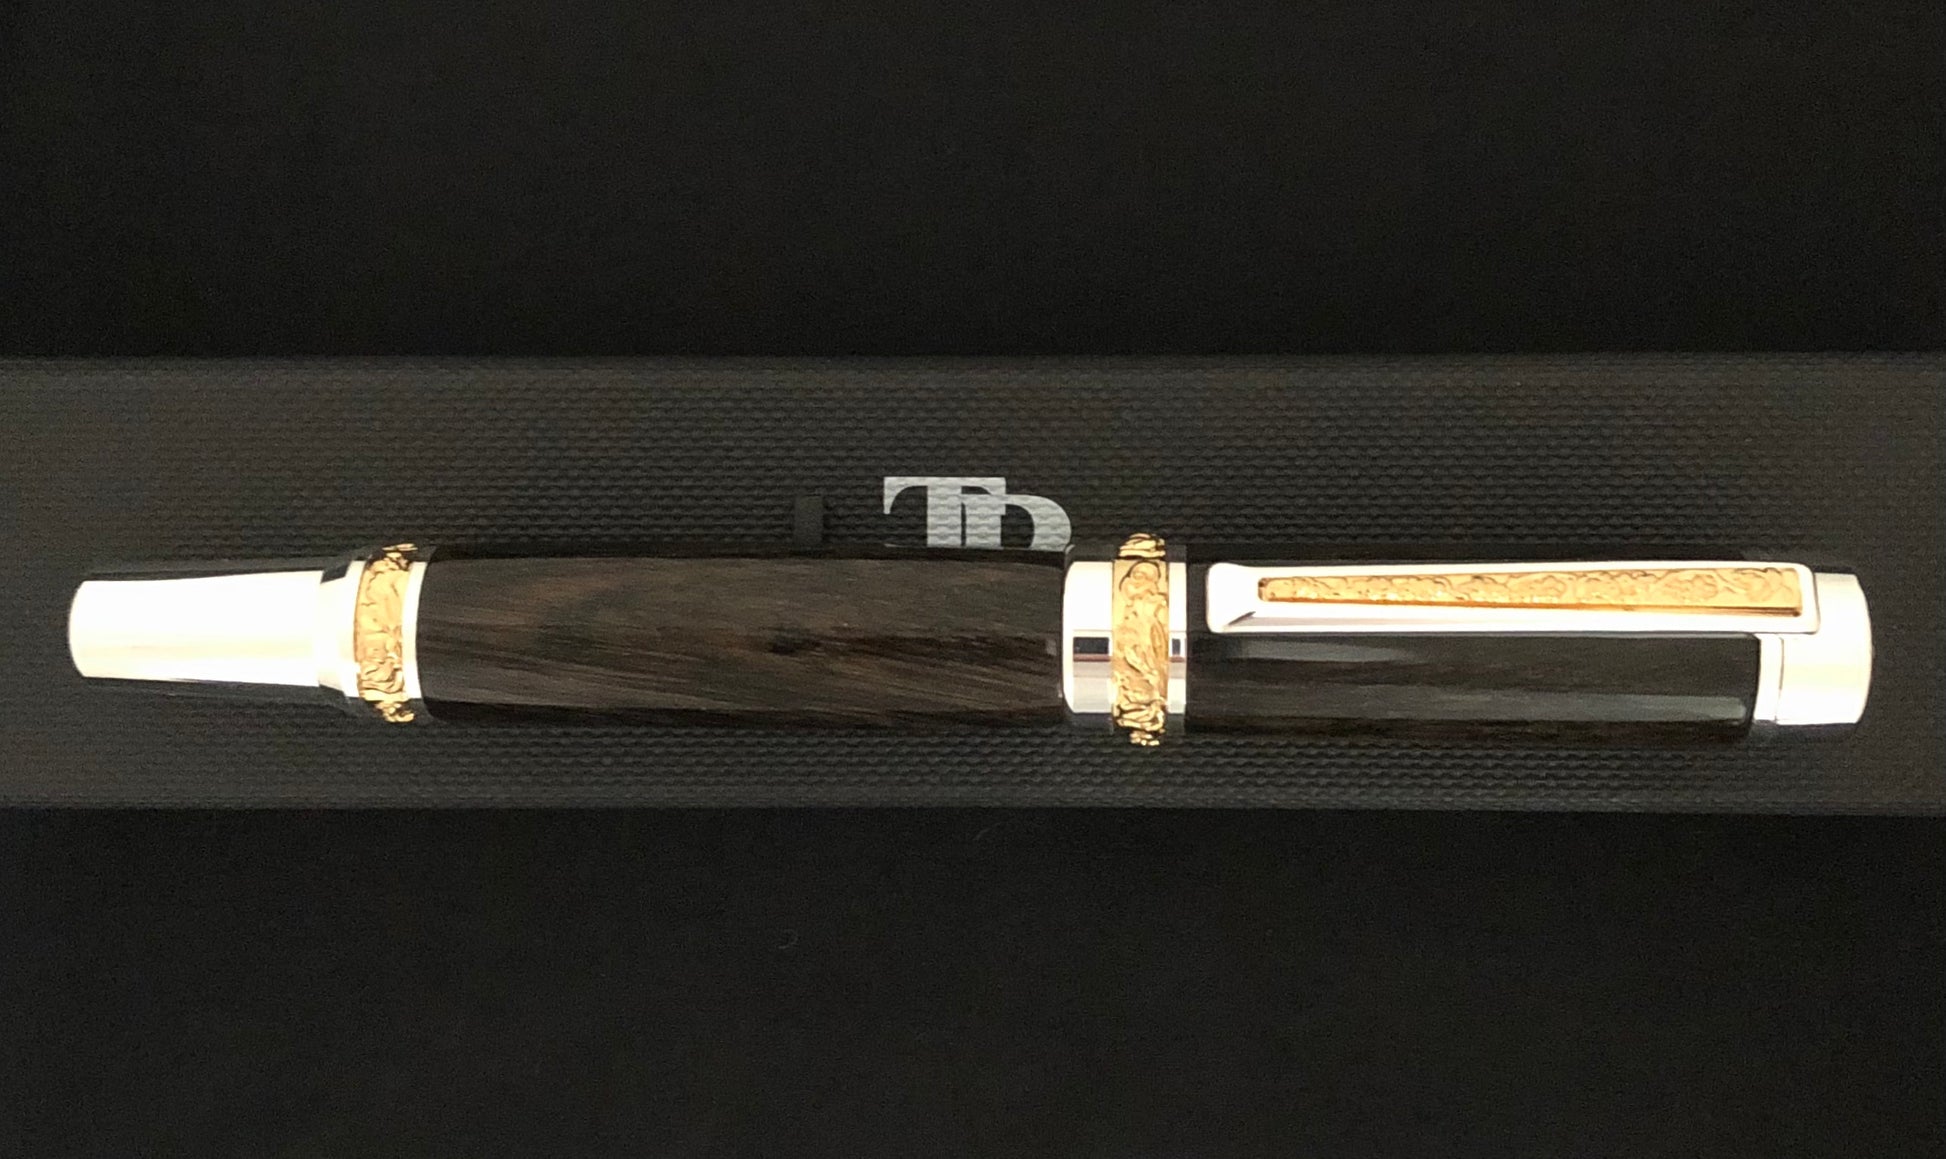 Irish Bog Oak 5000 years old - Silver and Gold Fountain PenIrish Bog Oak 5000 years old - Silver and Gold Rollerball Pen